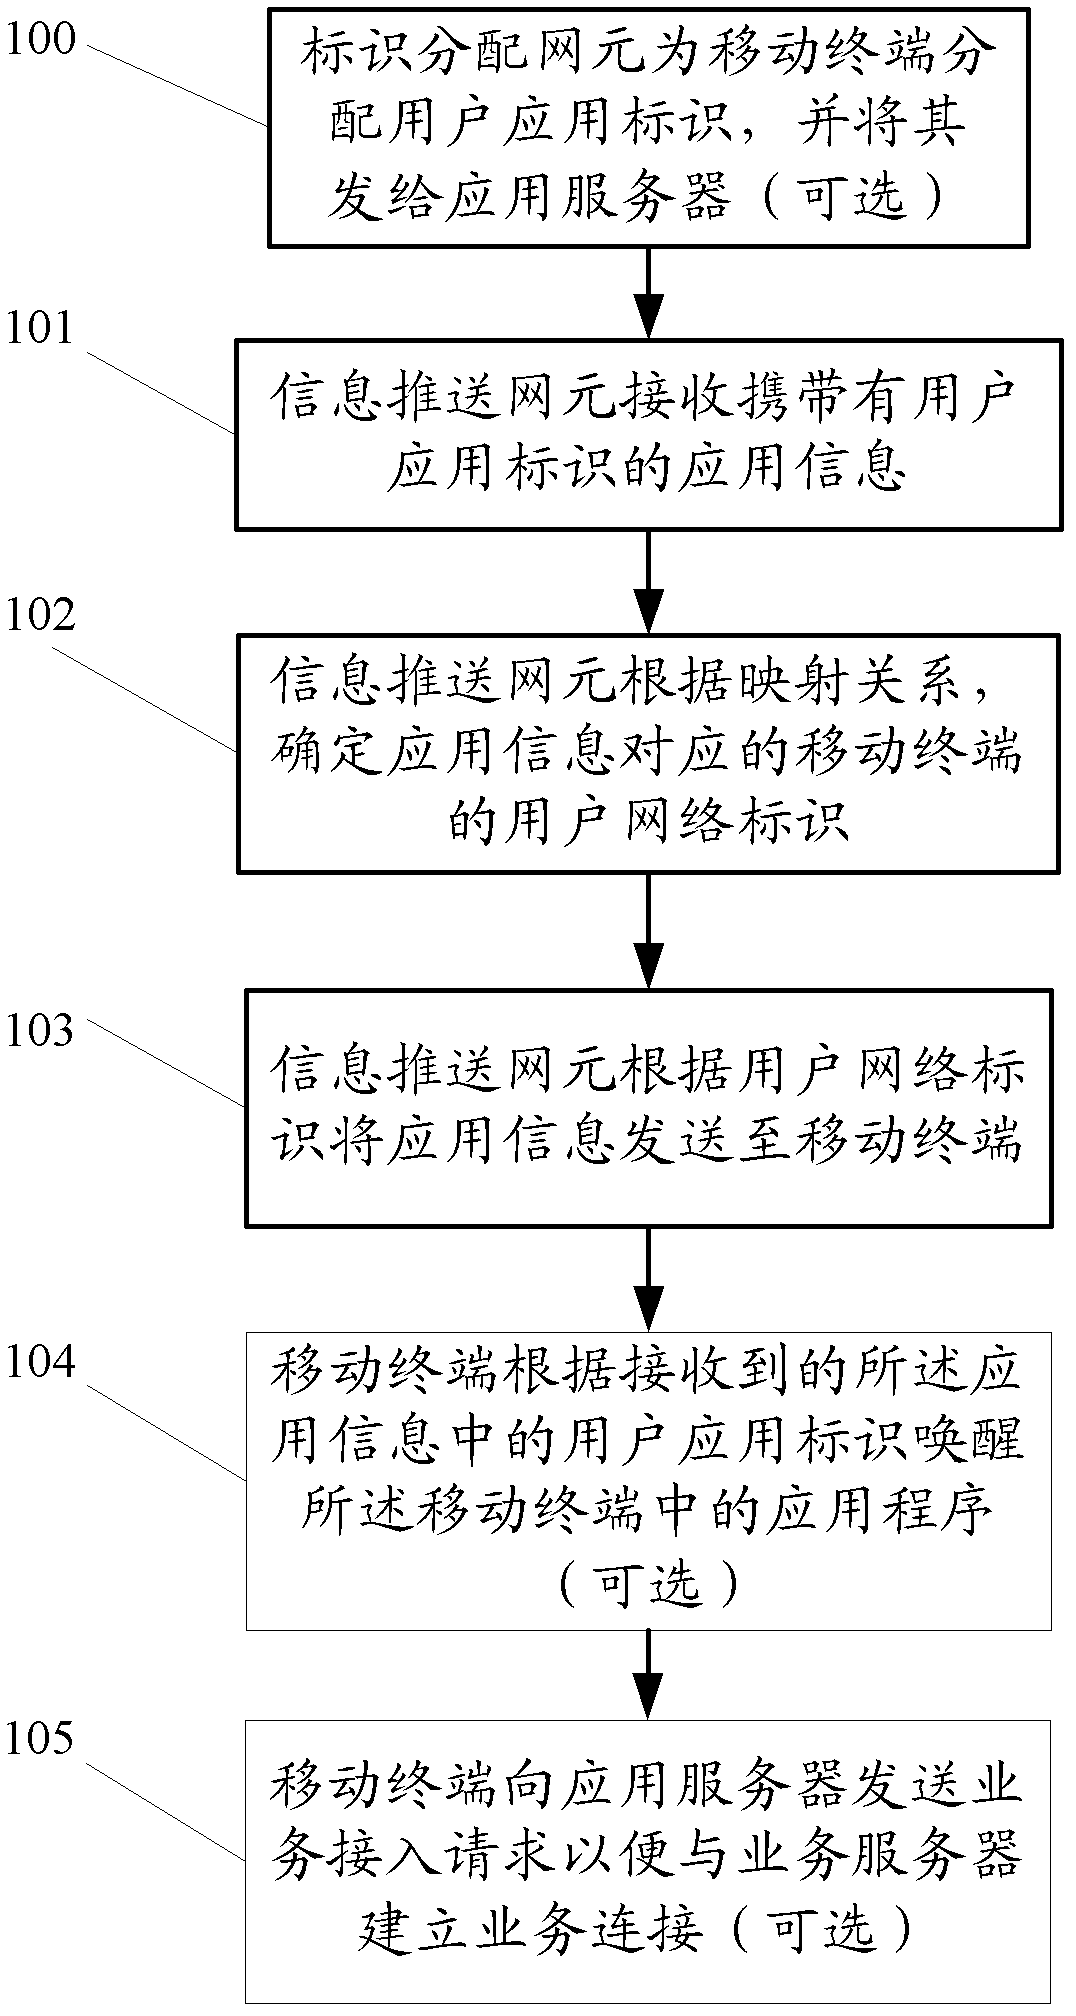 Application information push method, system and network element